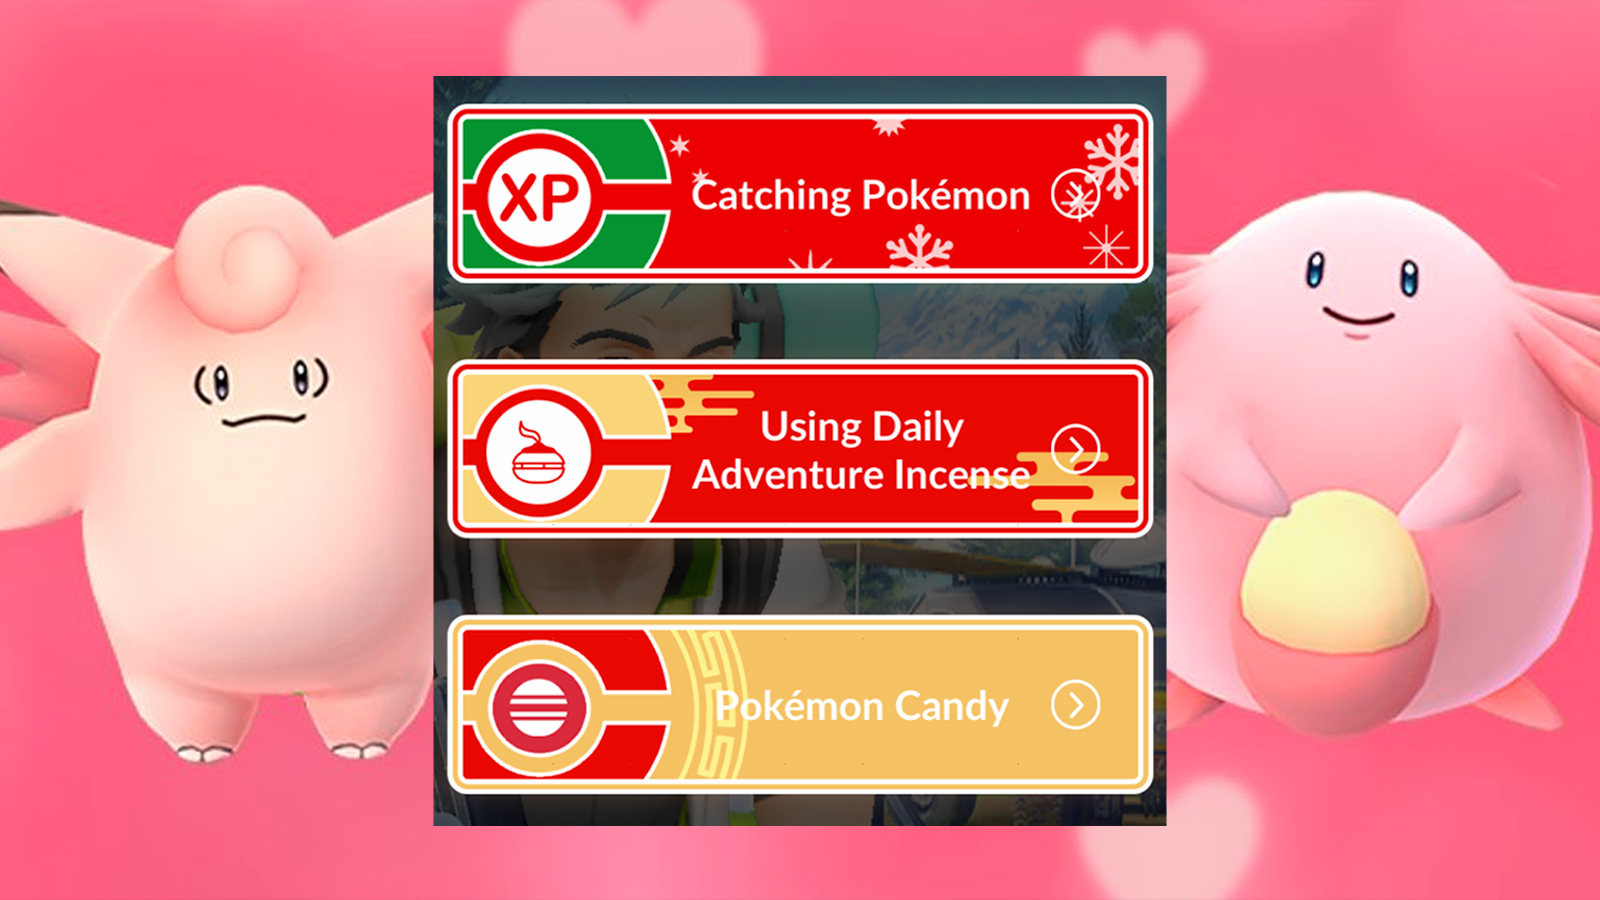 Pokemon Go choose a path Should you pick Catching, Candy, or Daily